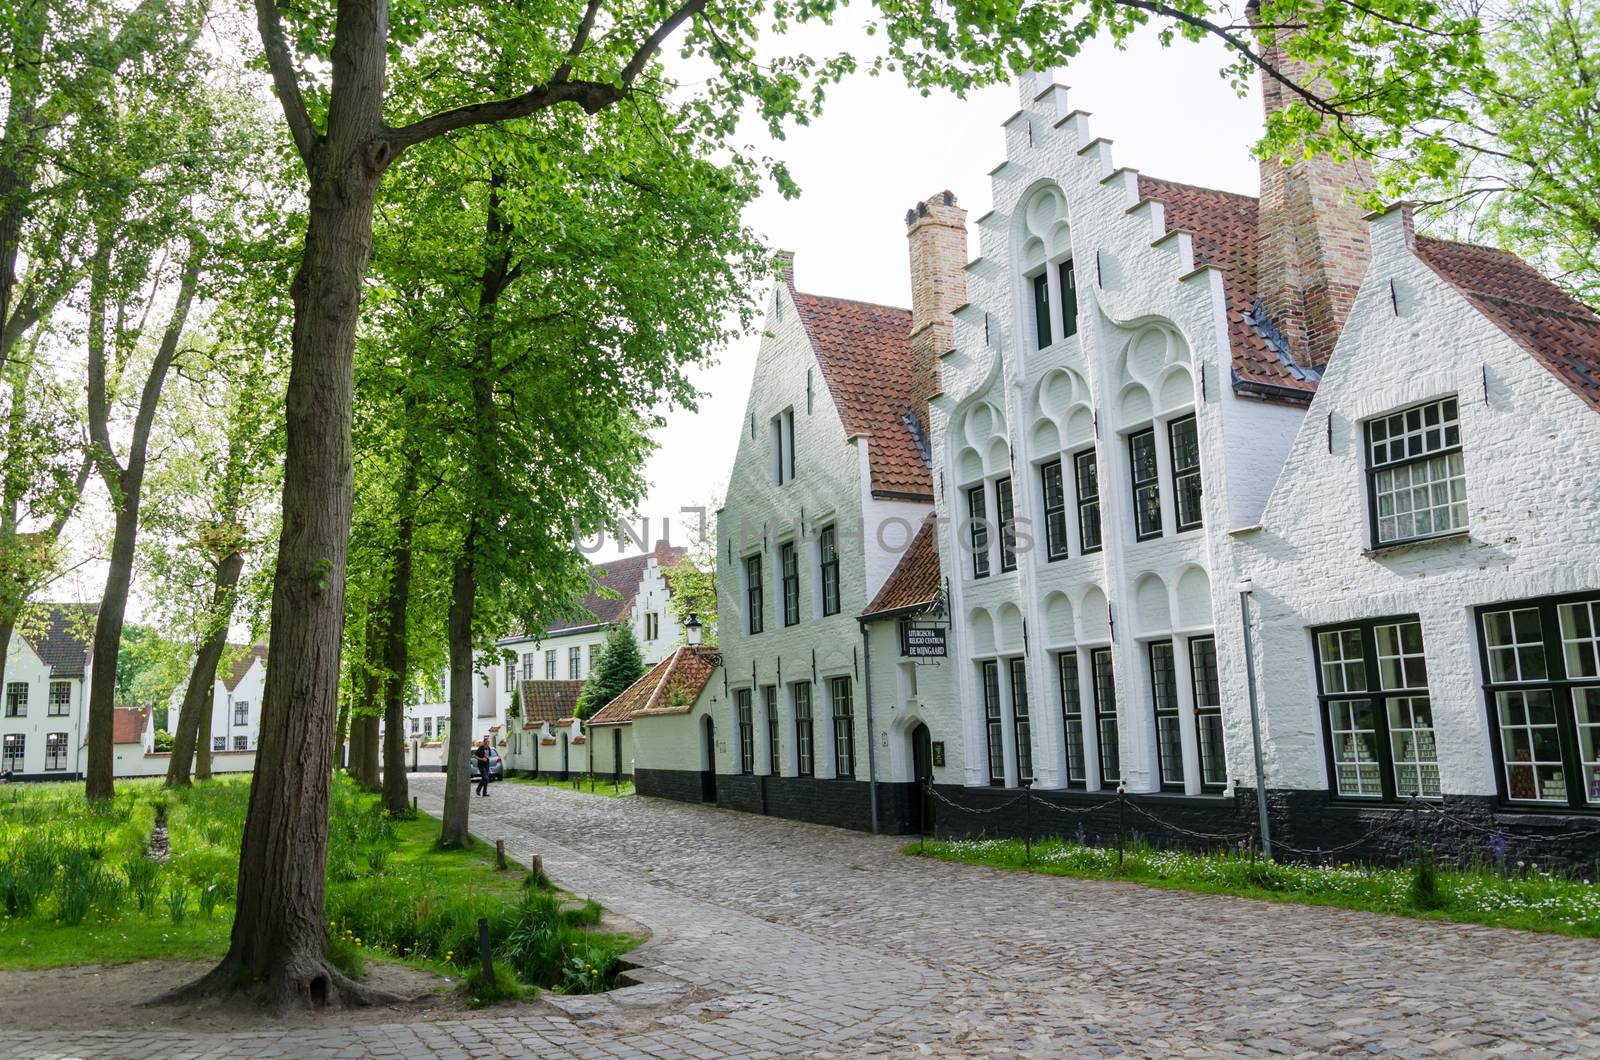 Bruges, Belgium - May 11, 2015: People visit White houses in the Beguinage (Begijnhof) in Bruges, Belgium. In 1937 the beguinage became a monastery for the Benedictine sisters who still live here now. 